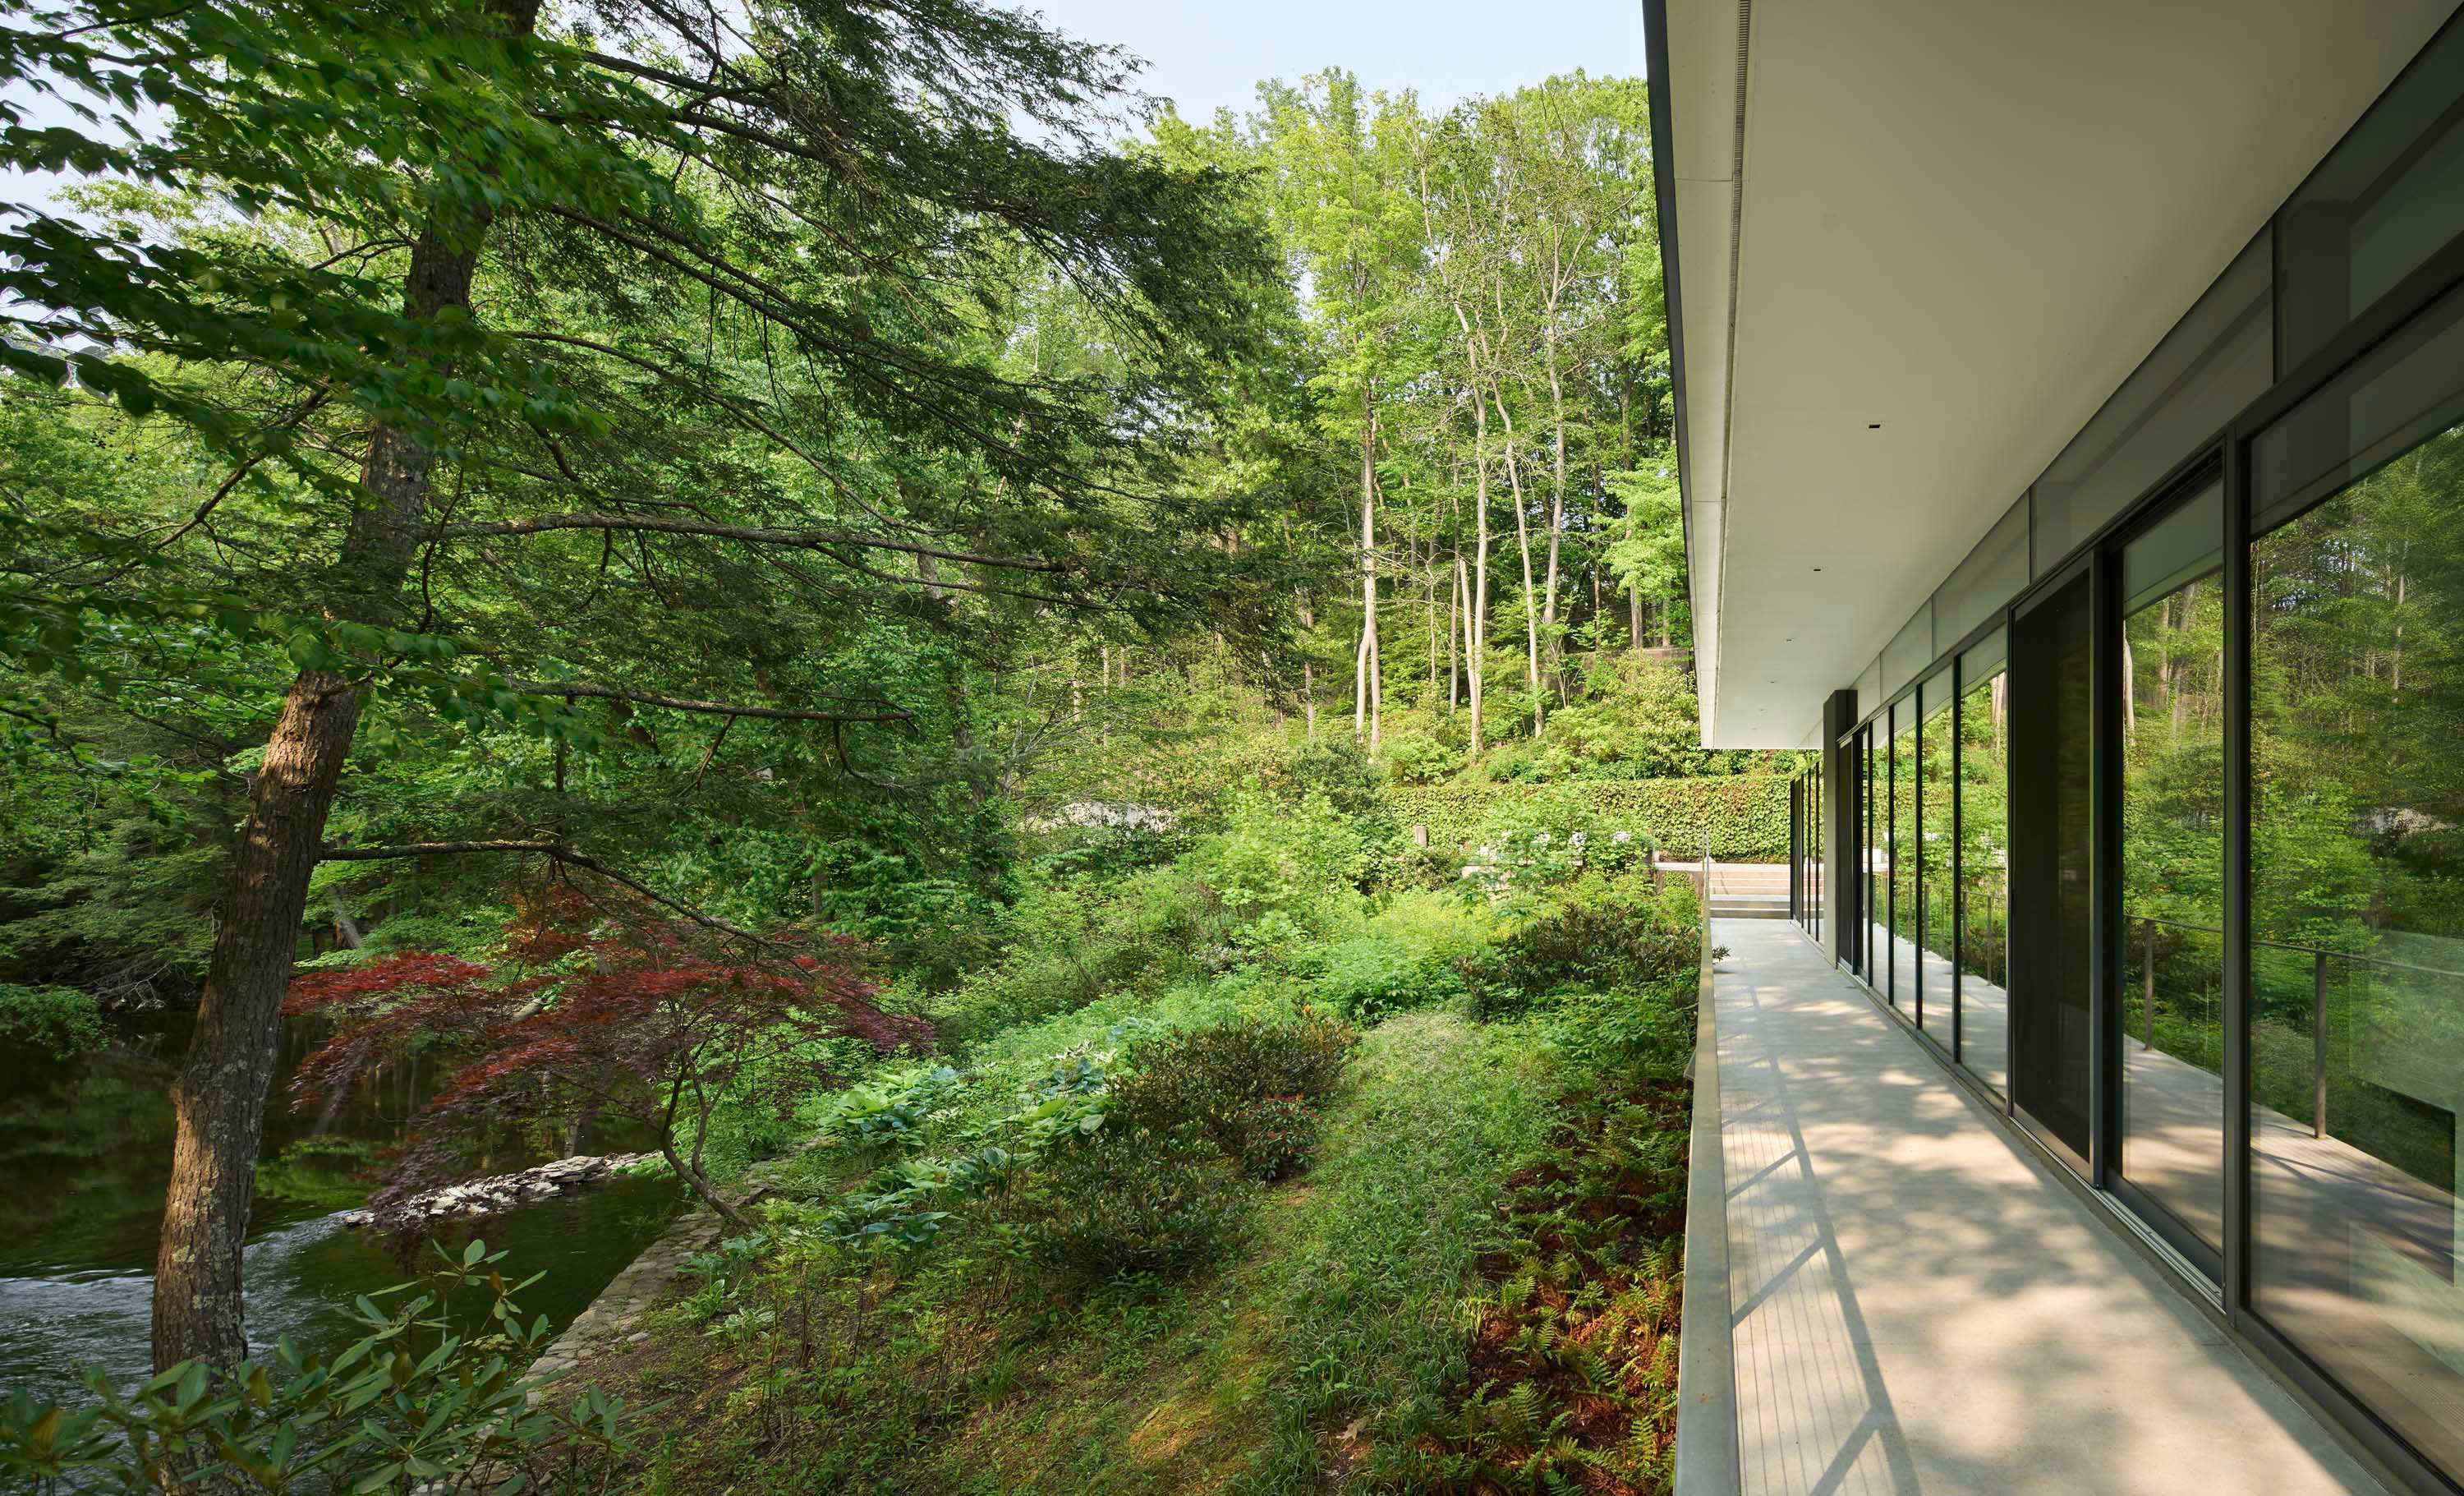 Exterior photo of Weston Residence by Specht Novak Architects. Shot by Jasper Lazor, featuring the perimeter of the home and its seamless relation to the surrounding nature.